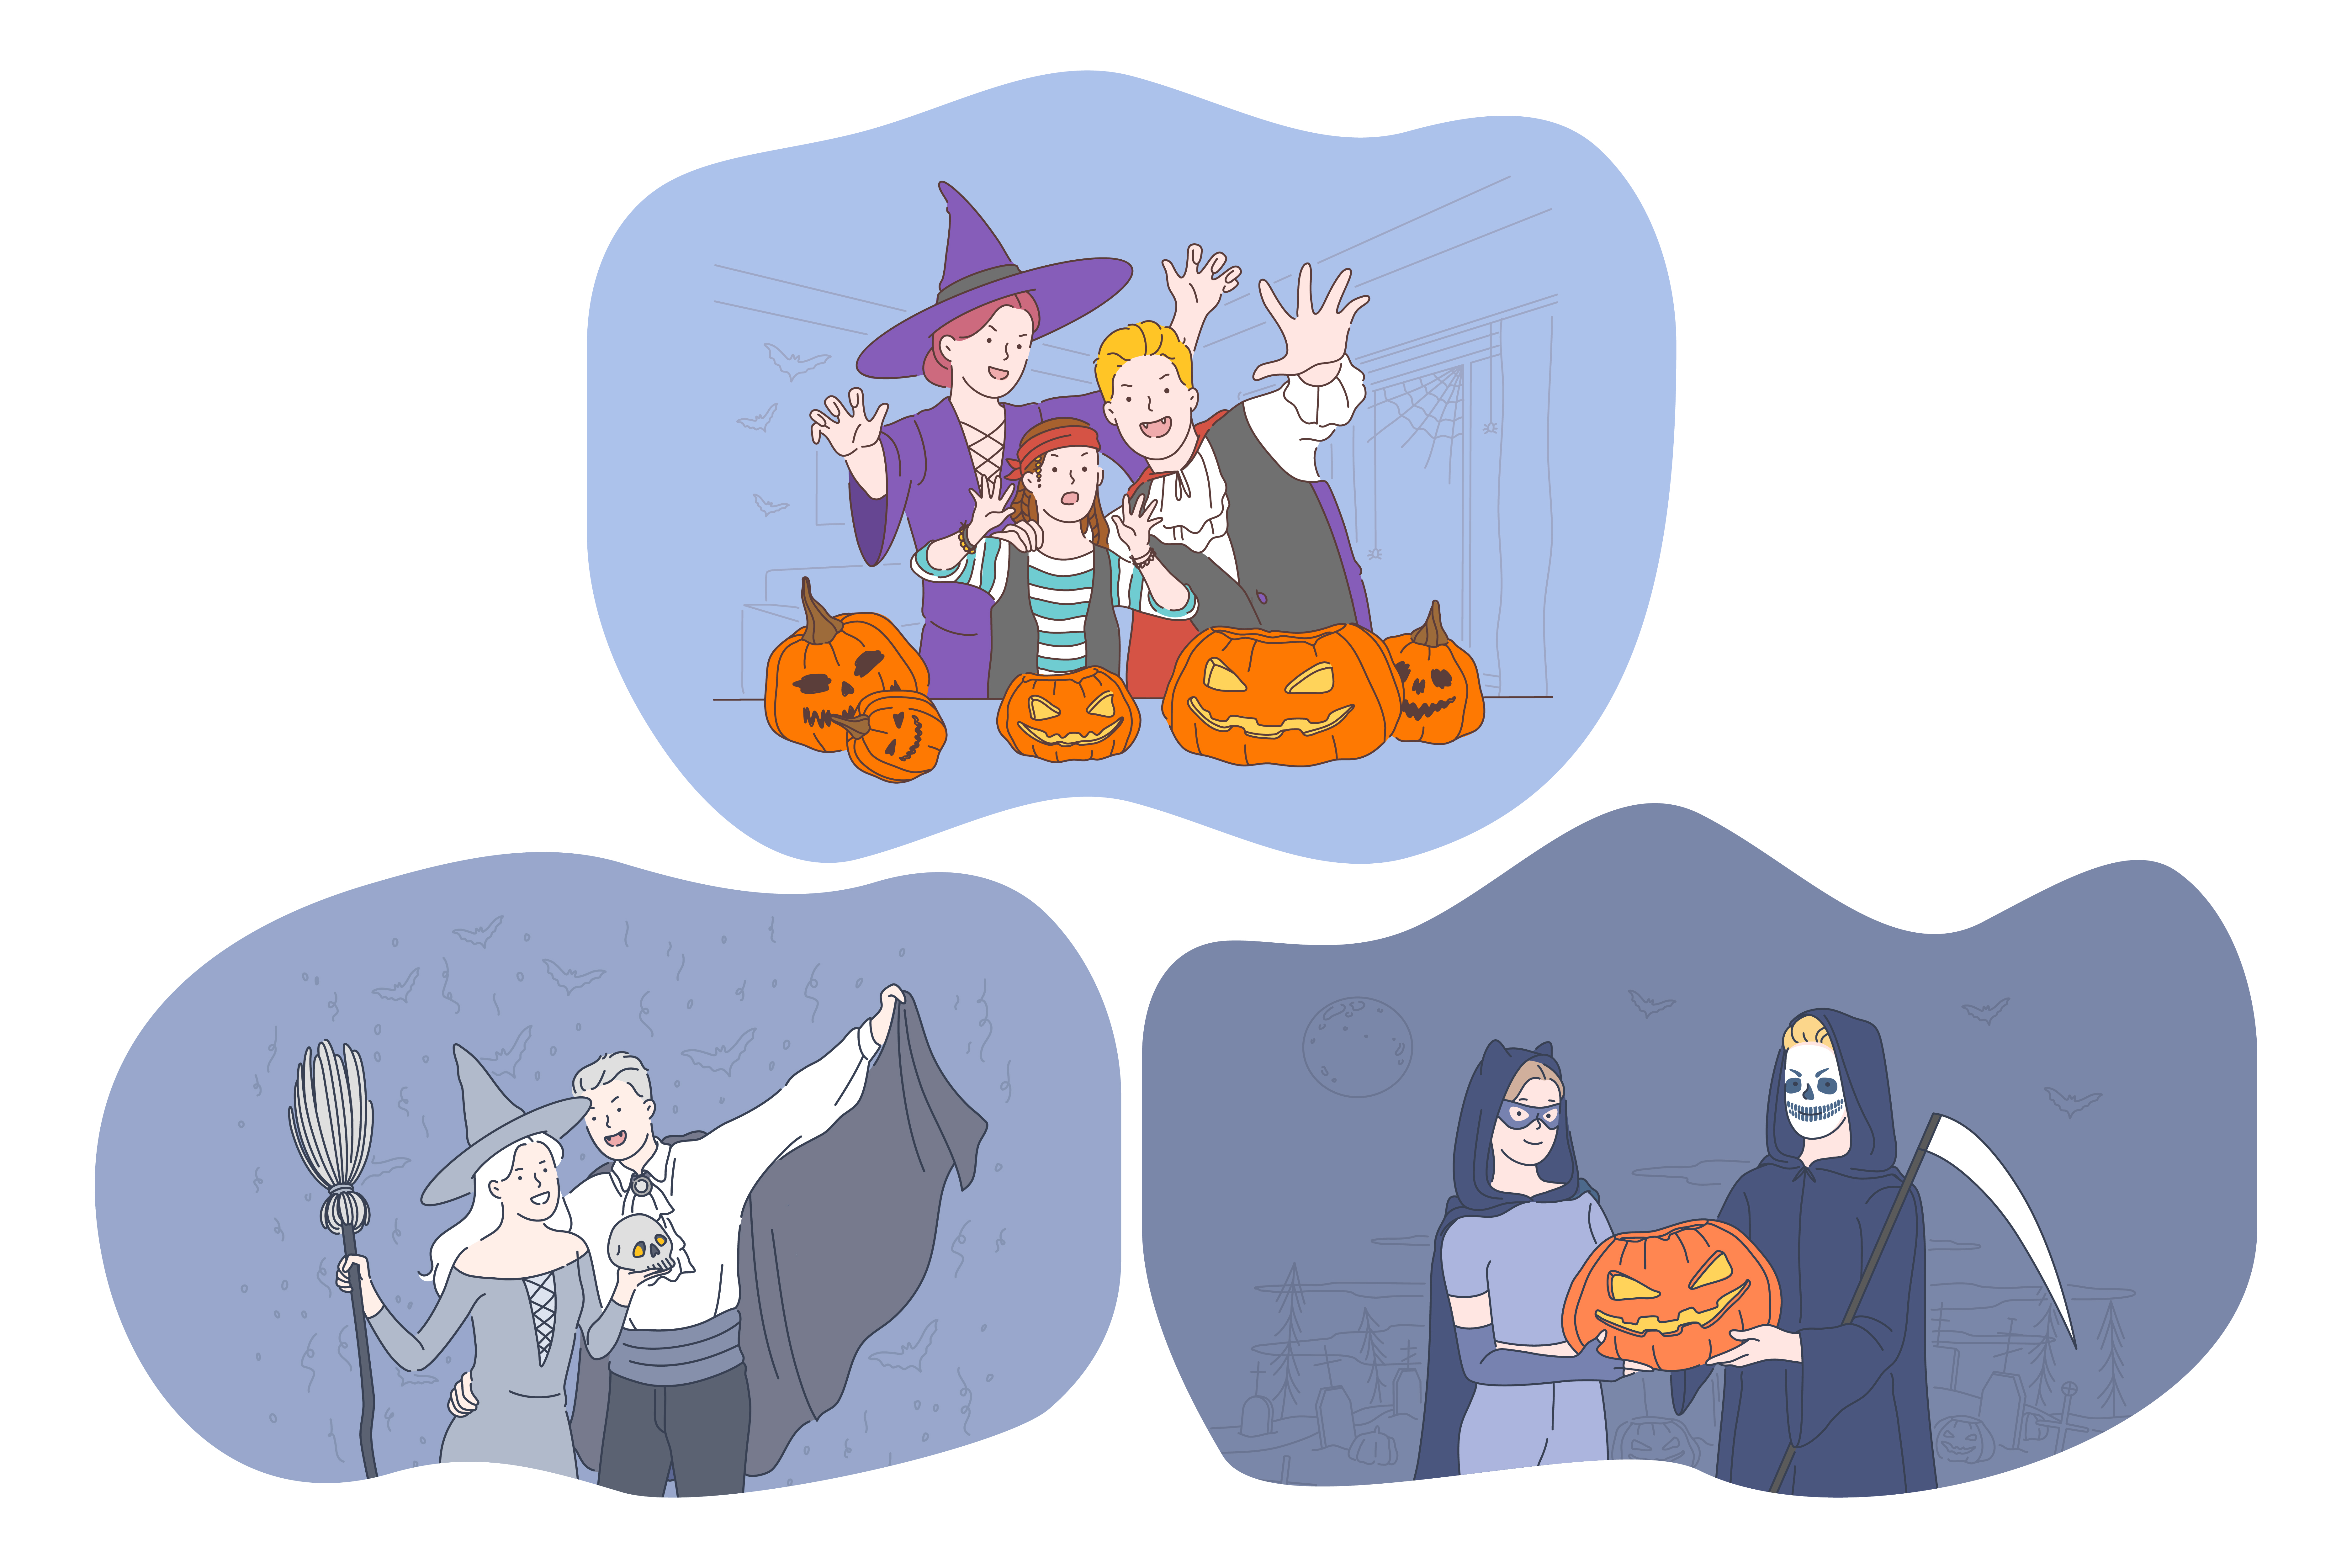 Celebrating Halloween holiday in spooky costumes concept. Young positive people cartoon characters in hats, vampire, witch, monster costumes celebrating Halloween with traditional pumpkins in hands . Celebrating Halloween holiday in spooky costumes concept